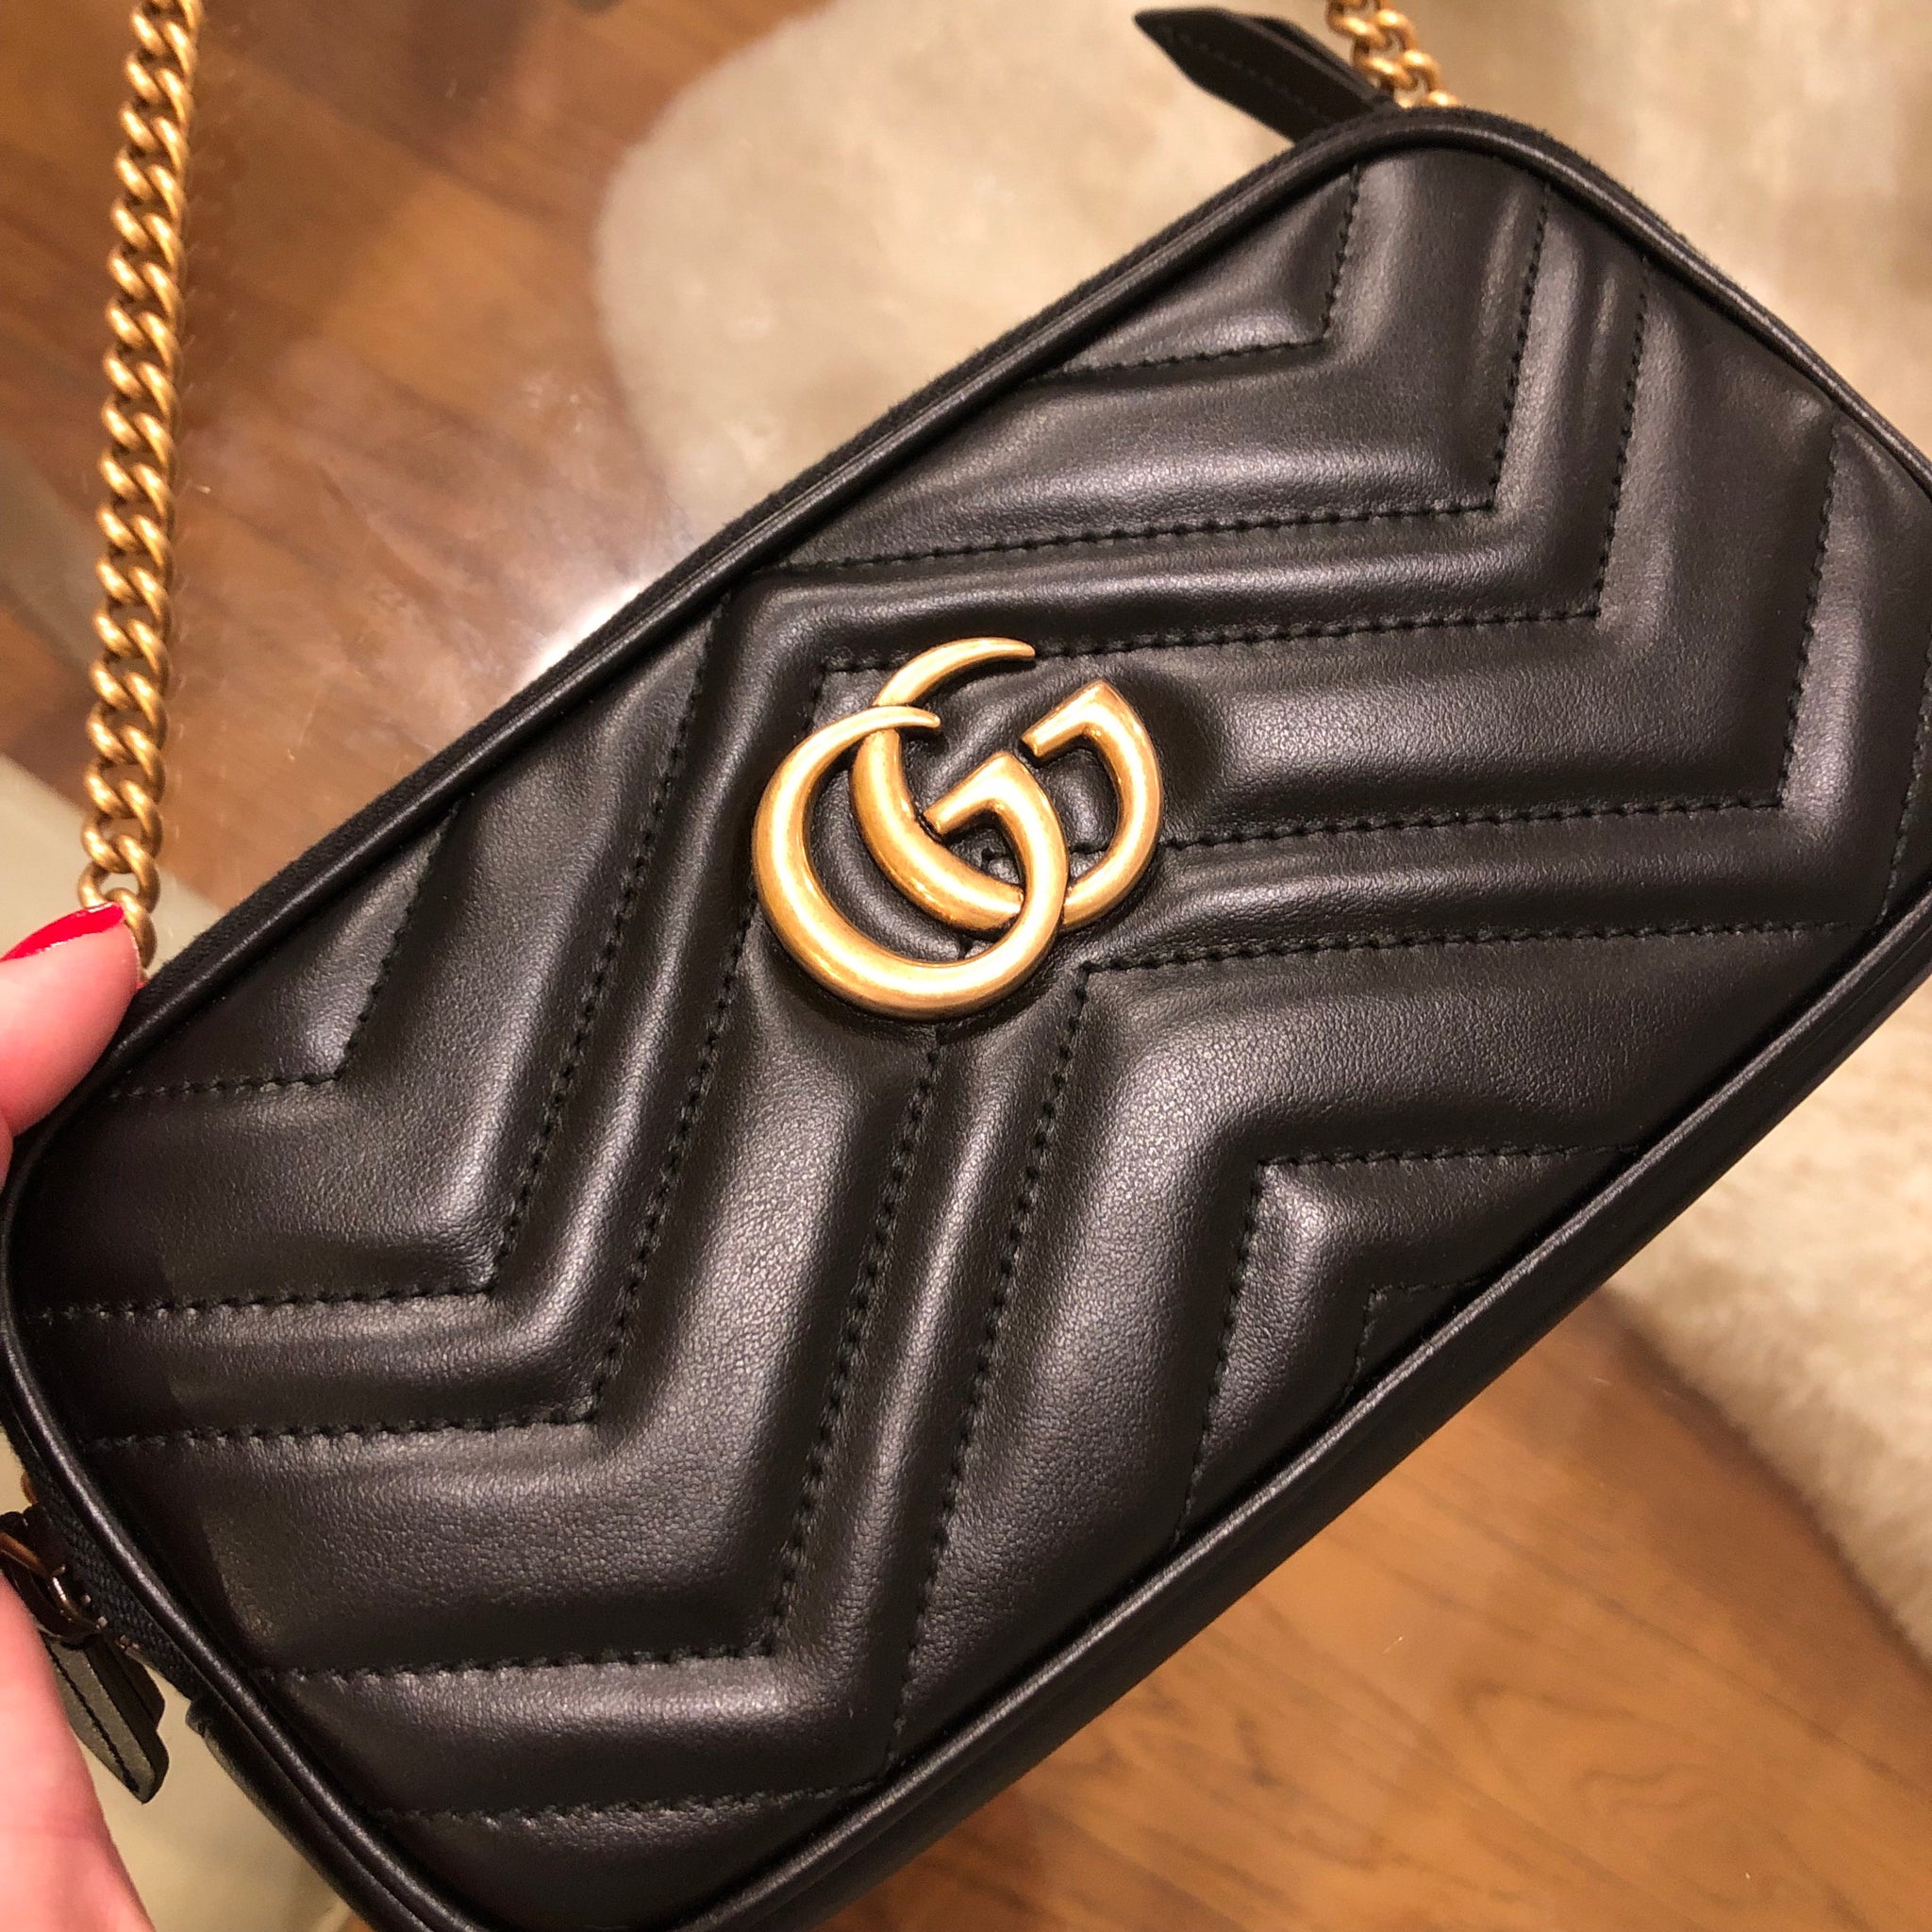 Gucci Interlocking GG Review and What Fits! 